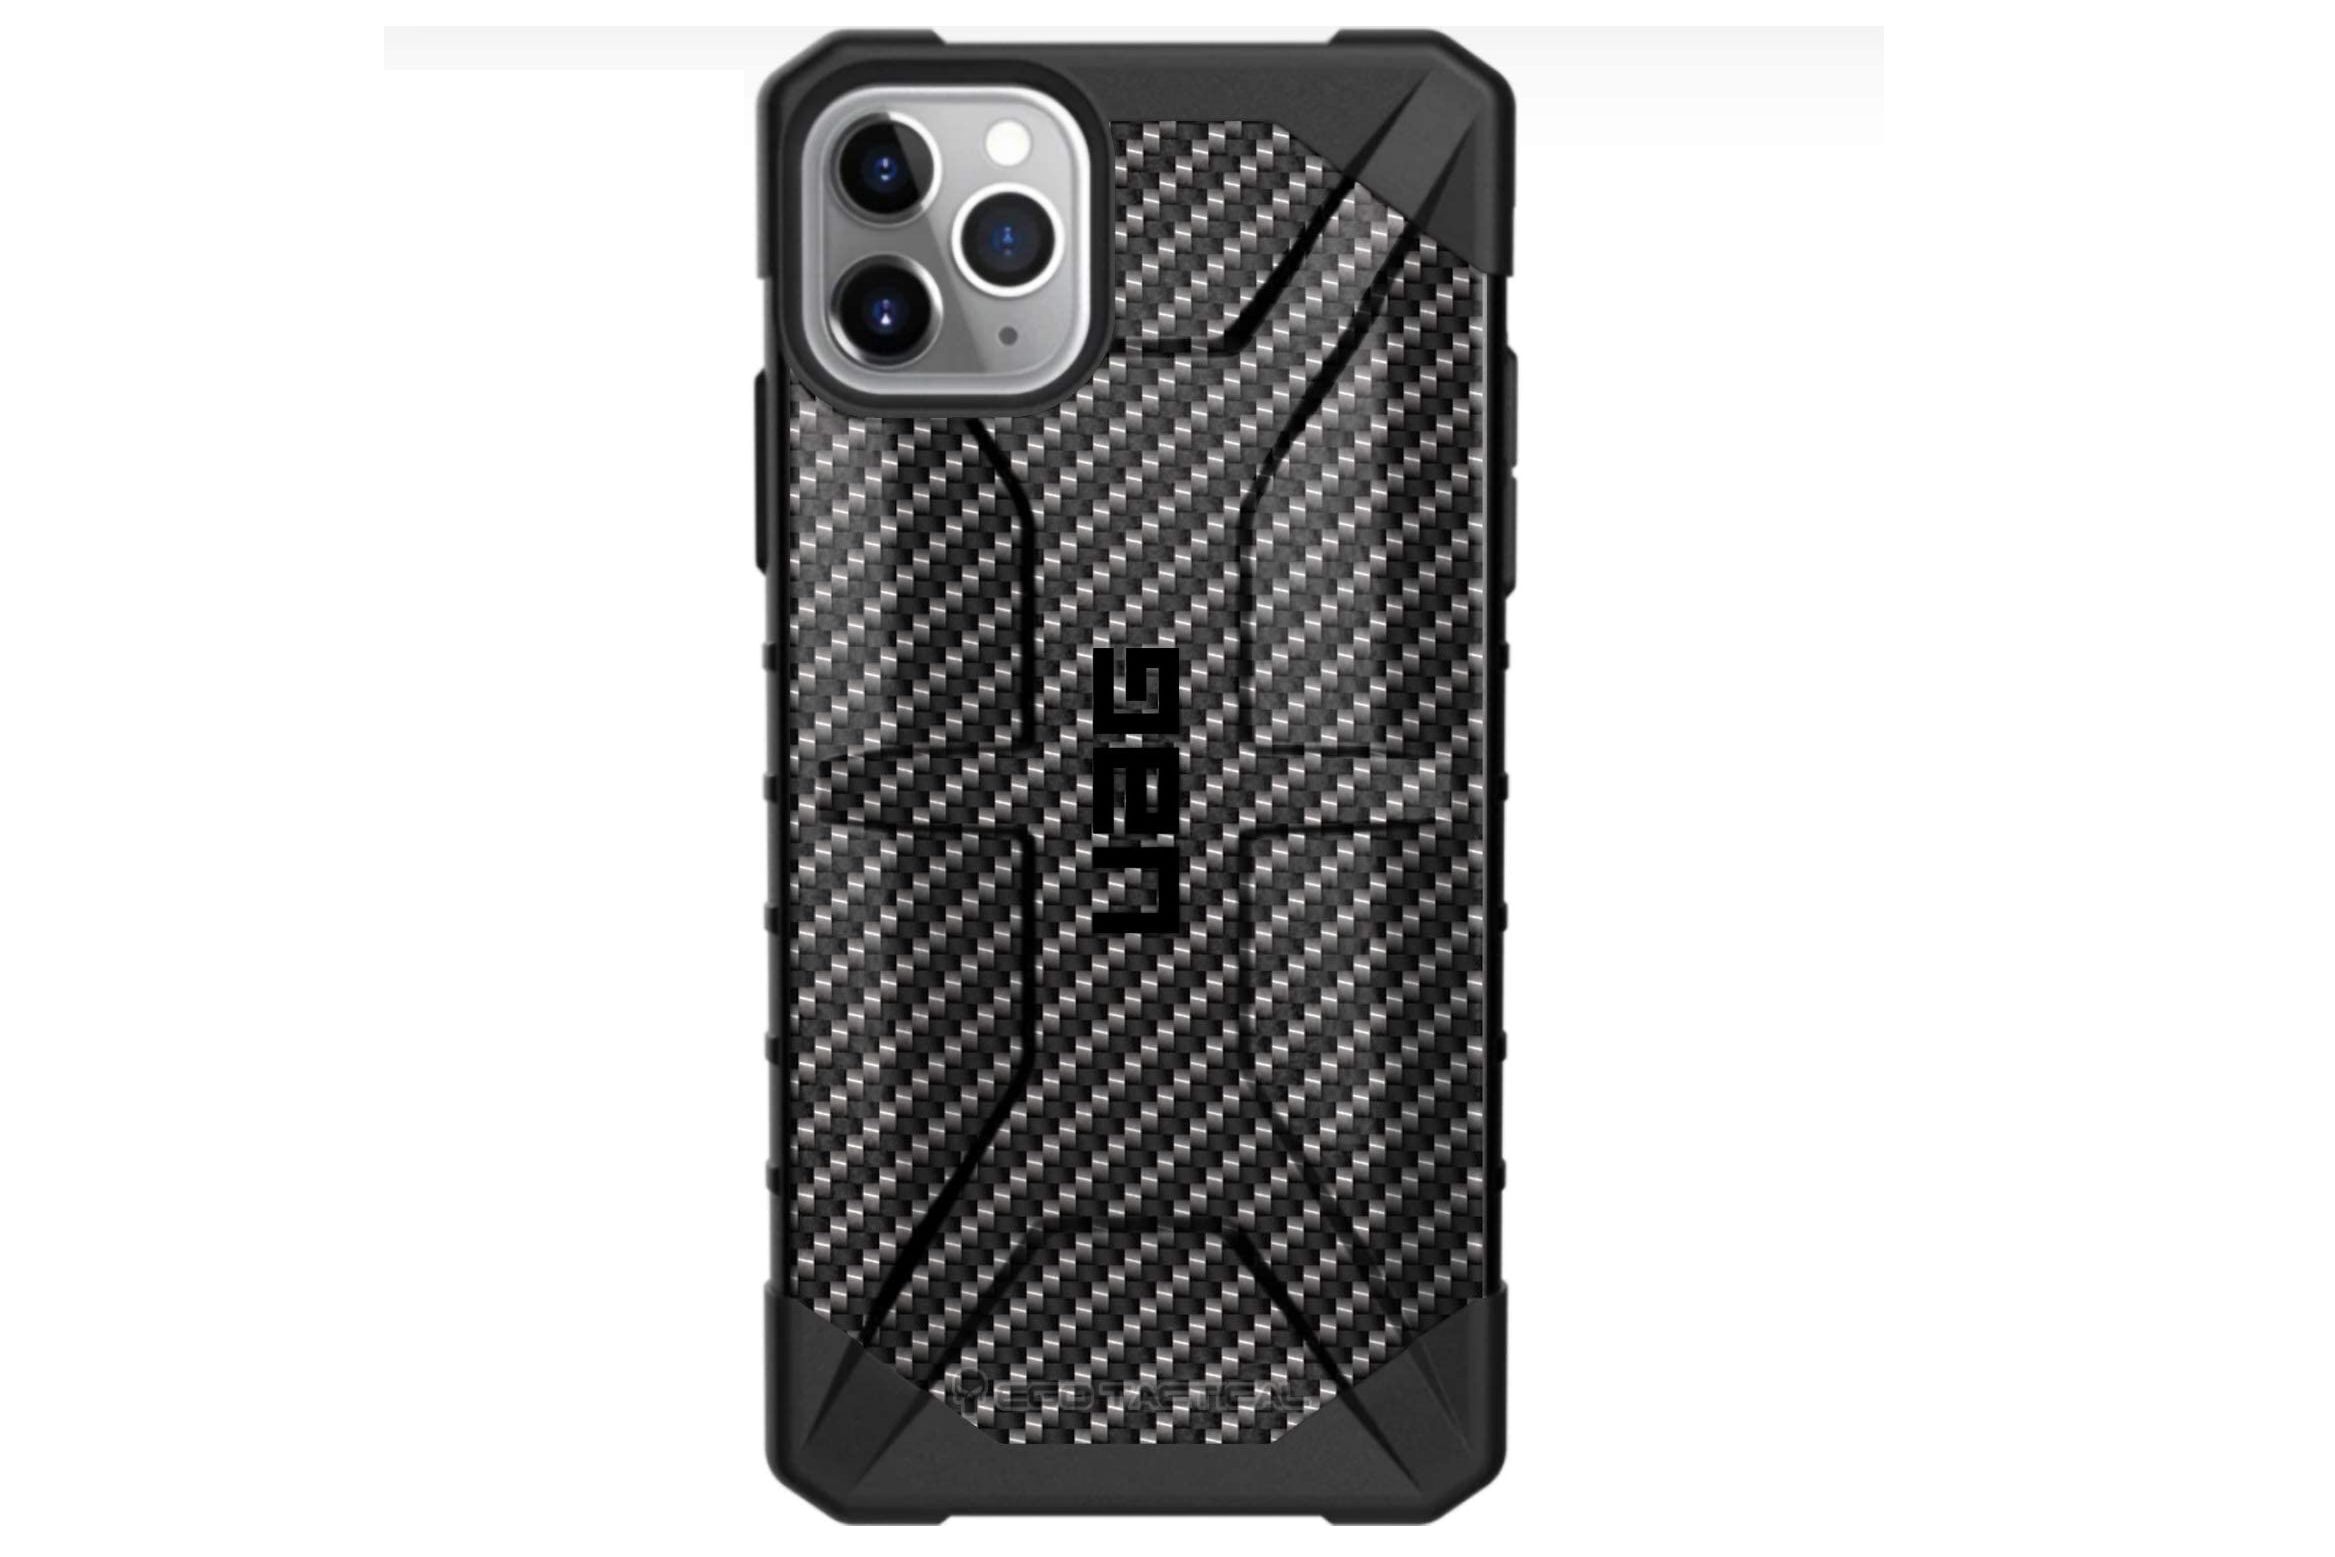 UAG Limited Edition iPhone 12 Pro Max case by EGO Tactical - The best iPhone 12 Pro Max cases - our top list